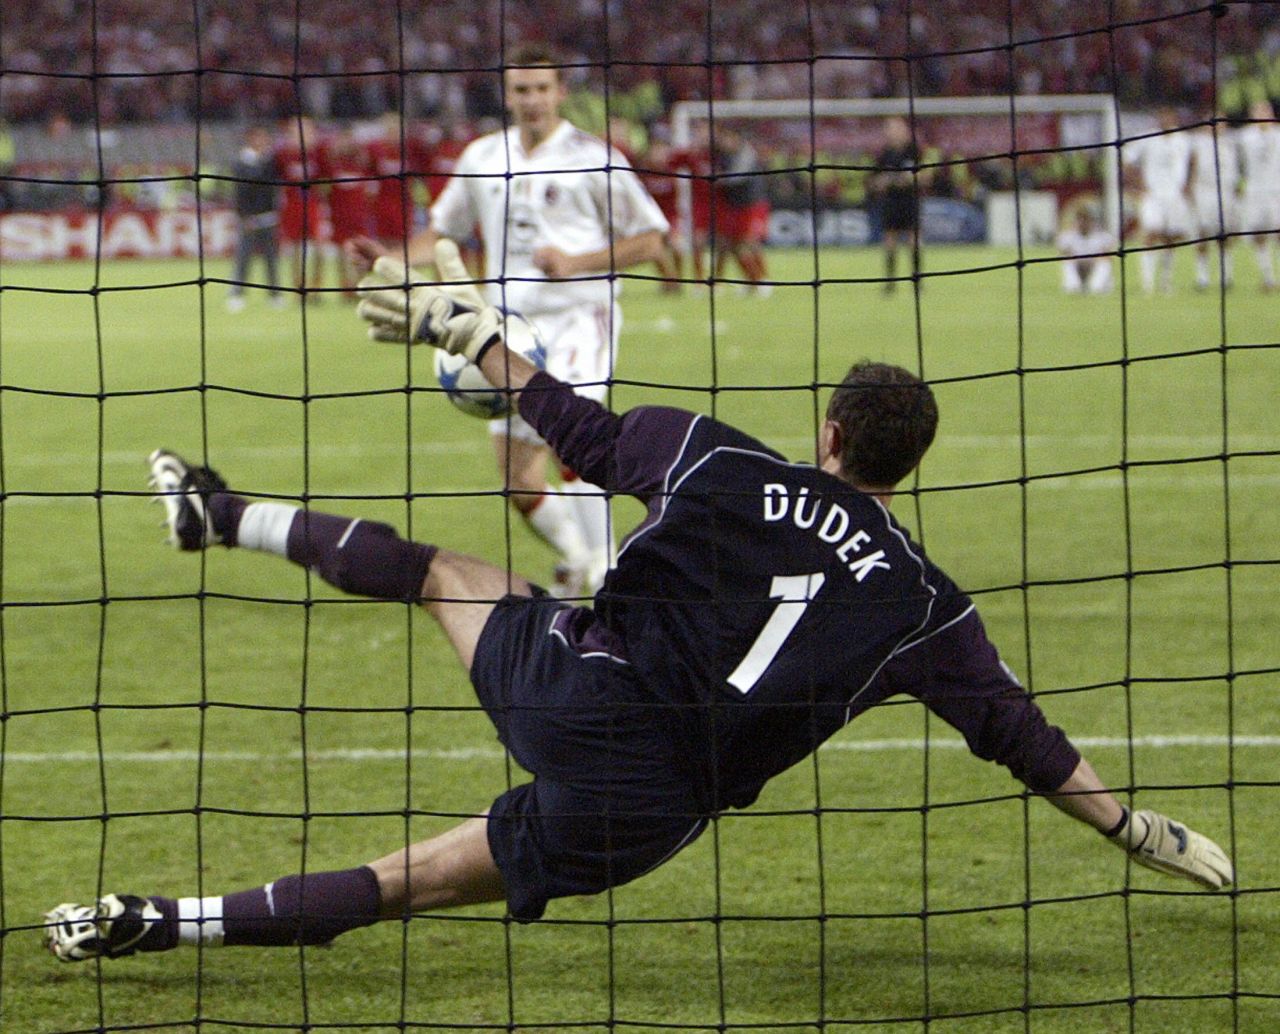 Liverpool pulled off a shock of their own in 2005. At half-time against Italian giants AC Milan in Istanbul, Rafael Benitez's Liverpool found themselves 3-0 down. During an incredible second half, Liverpool scored three times before sealing a fifth European triumph when goalkeeper Jerzy Dudek saved Andriy Shevchenko's penalty in a shootout.